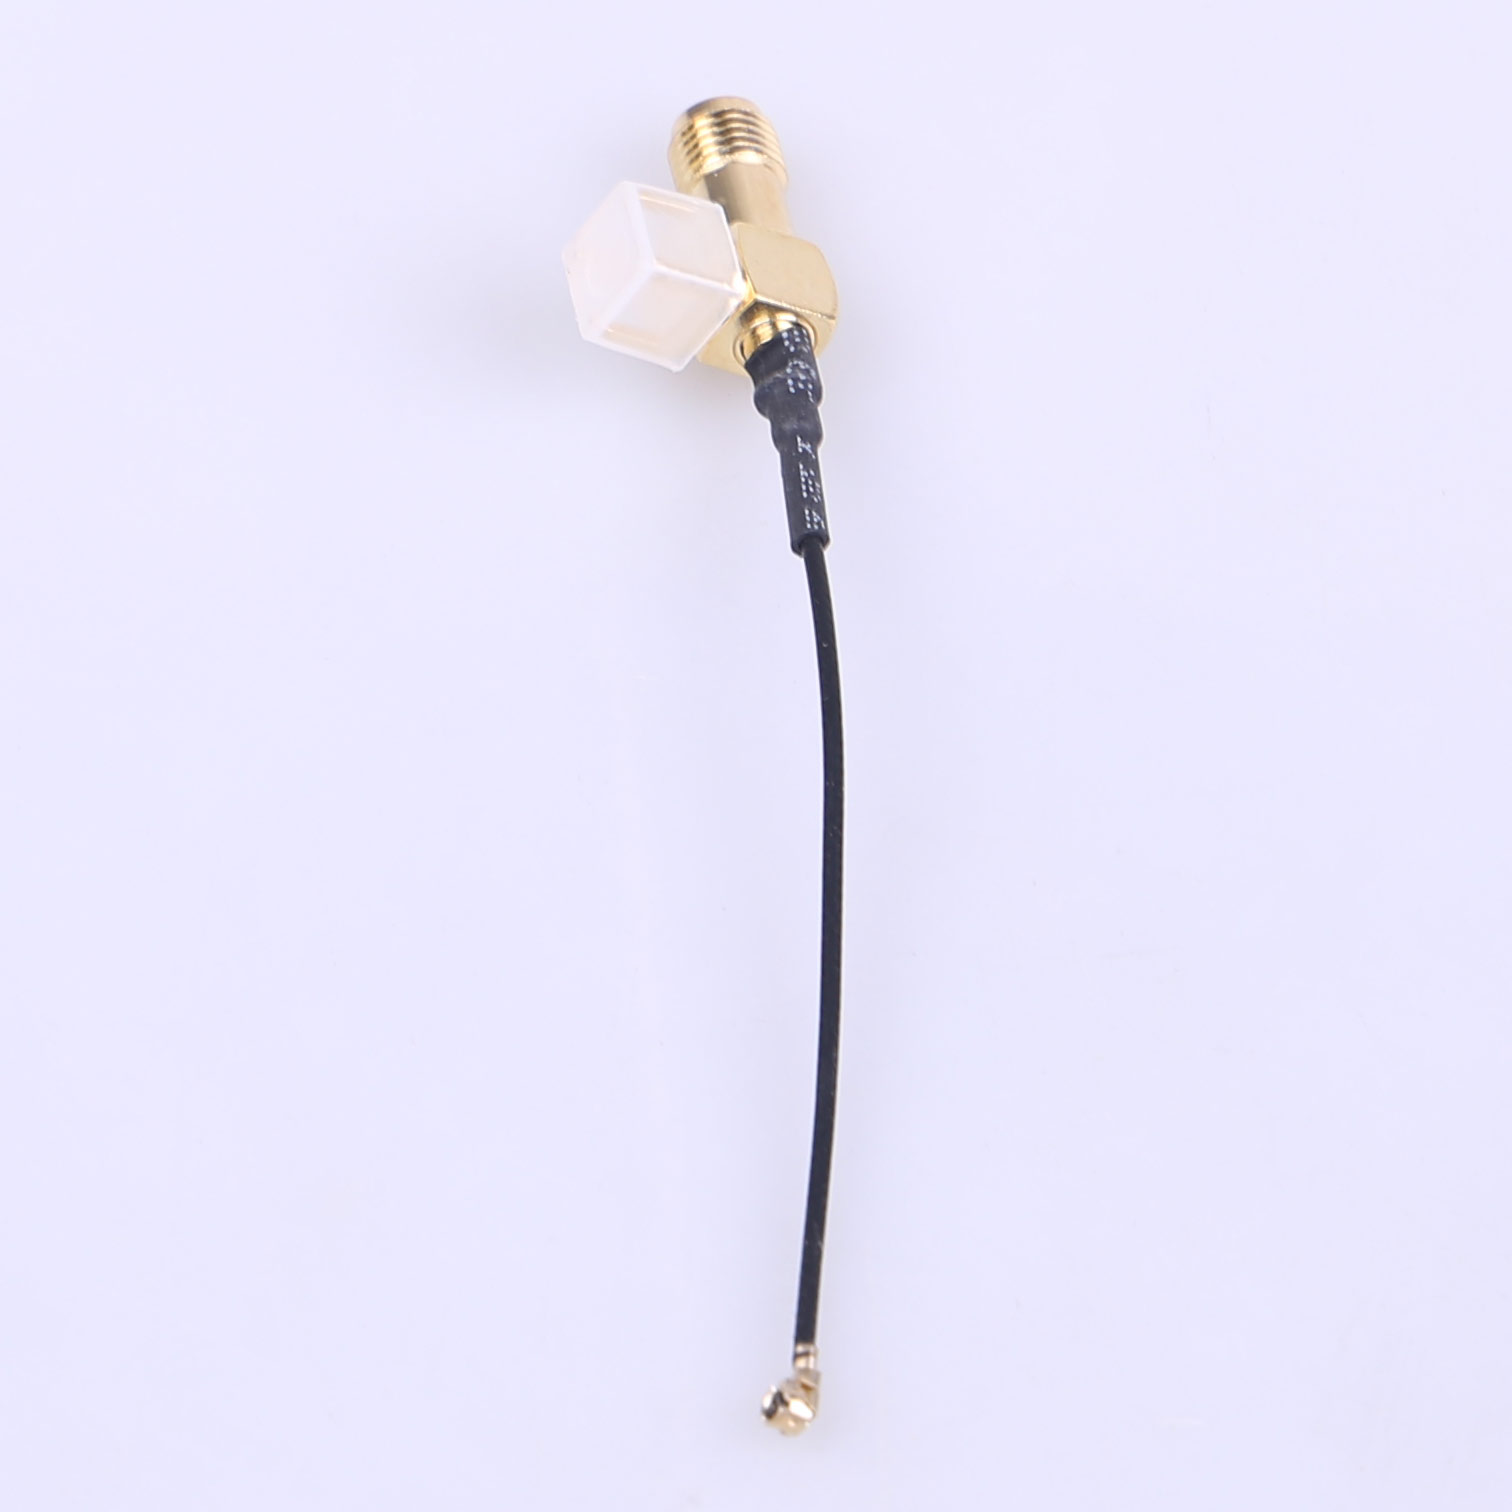 Kinghelm Coaxial connector IPEX to SMA antenna adapter cable welded I-PEX 1.13 terminal gold plating SMA split type With 11mm screw